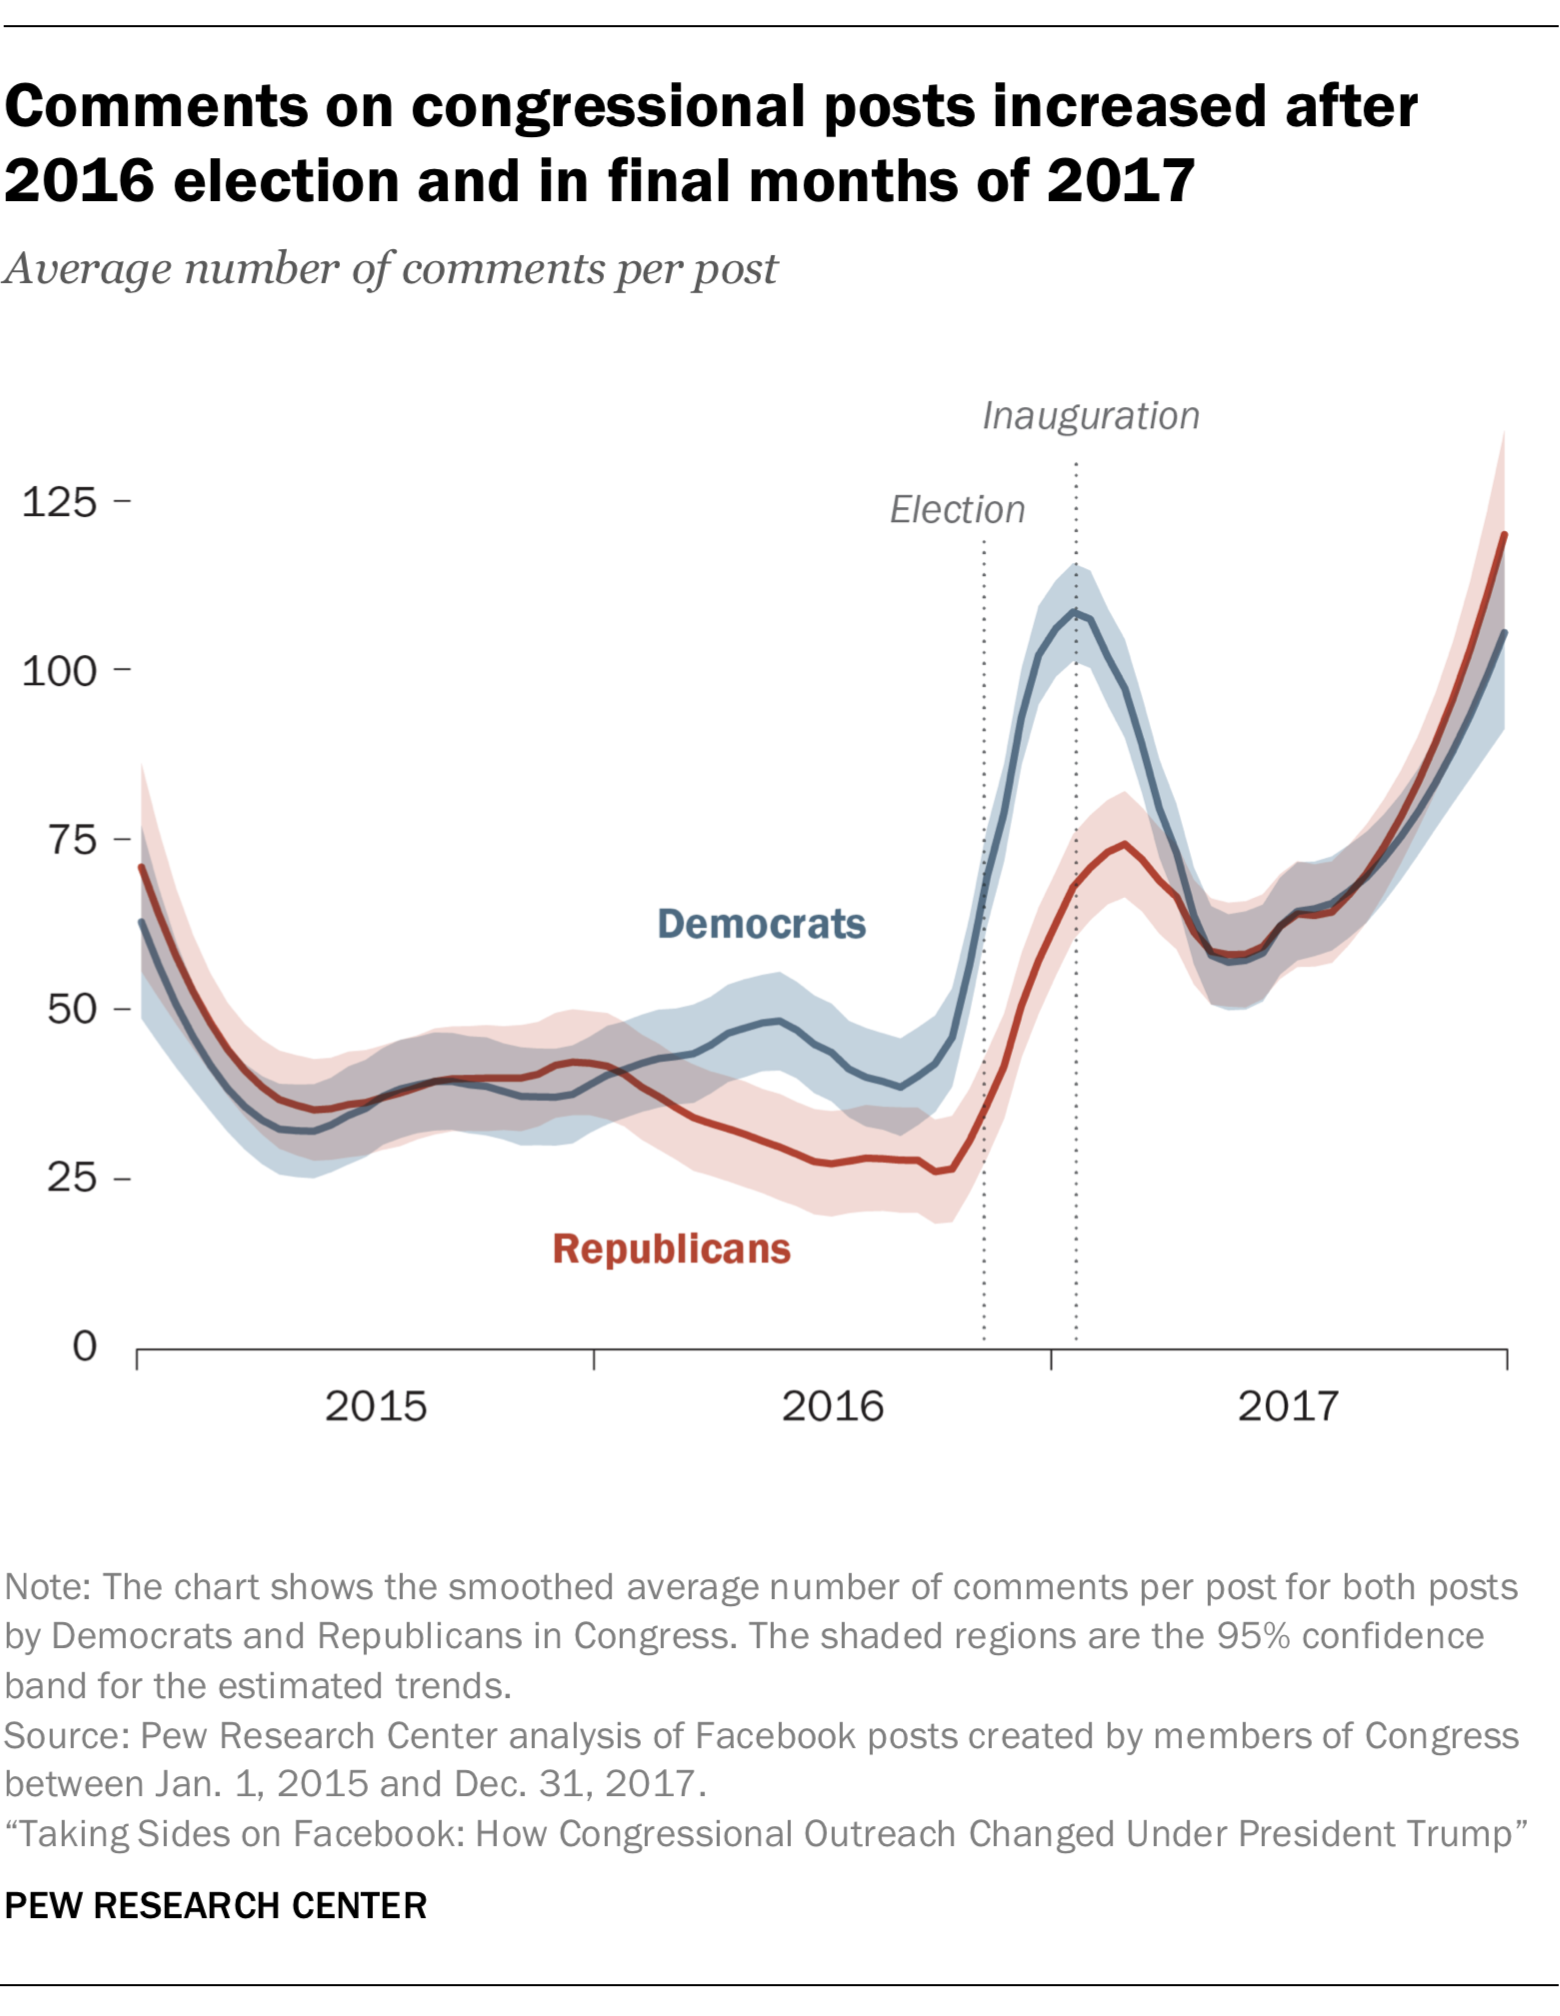 Comments on congressional posts increased after 2016 election and in final months of 2017